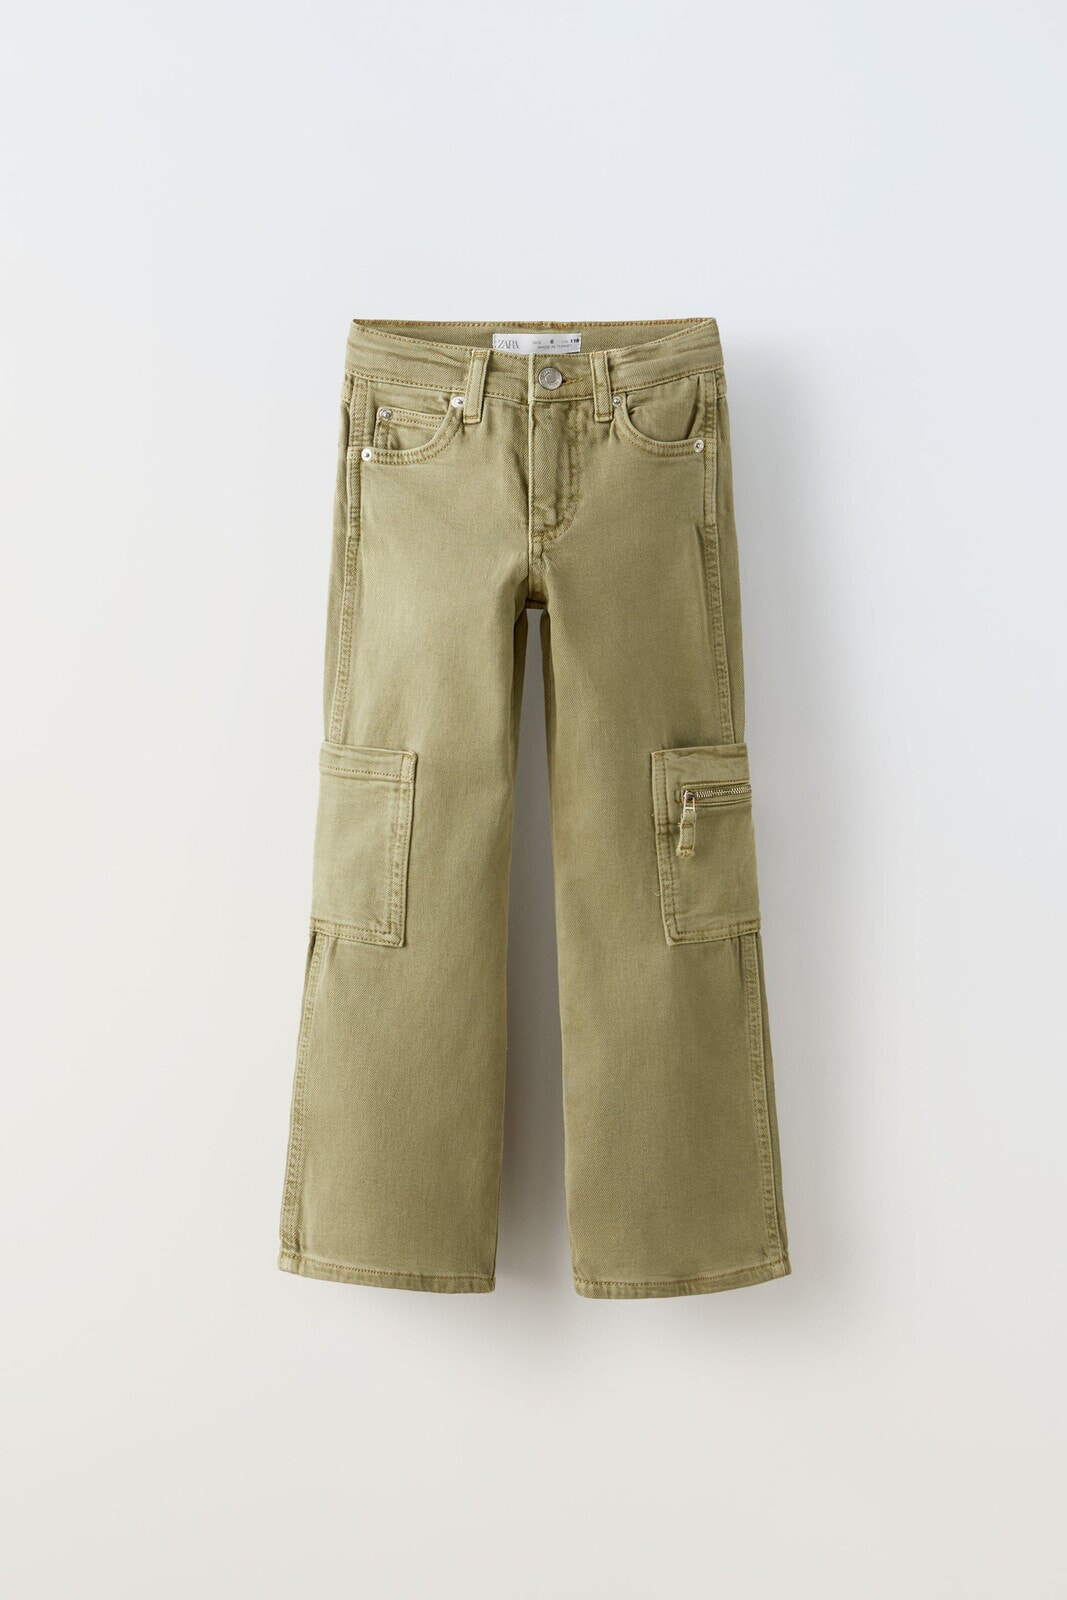 The new cargo jeans